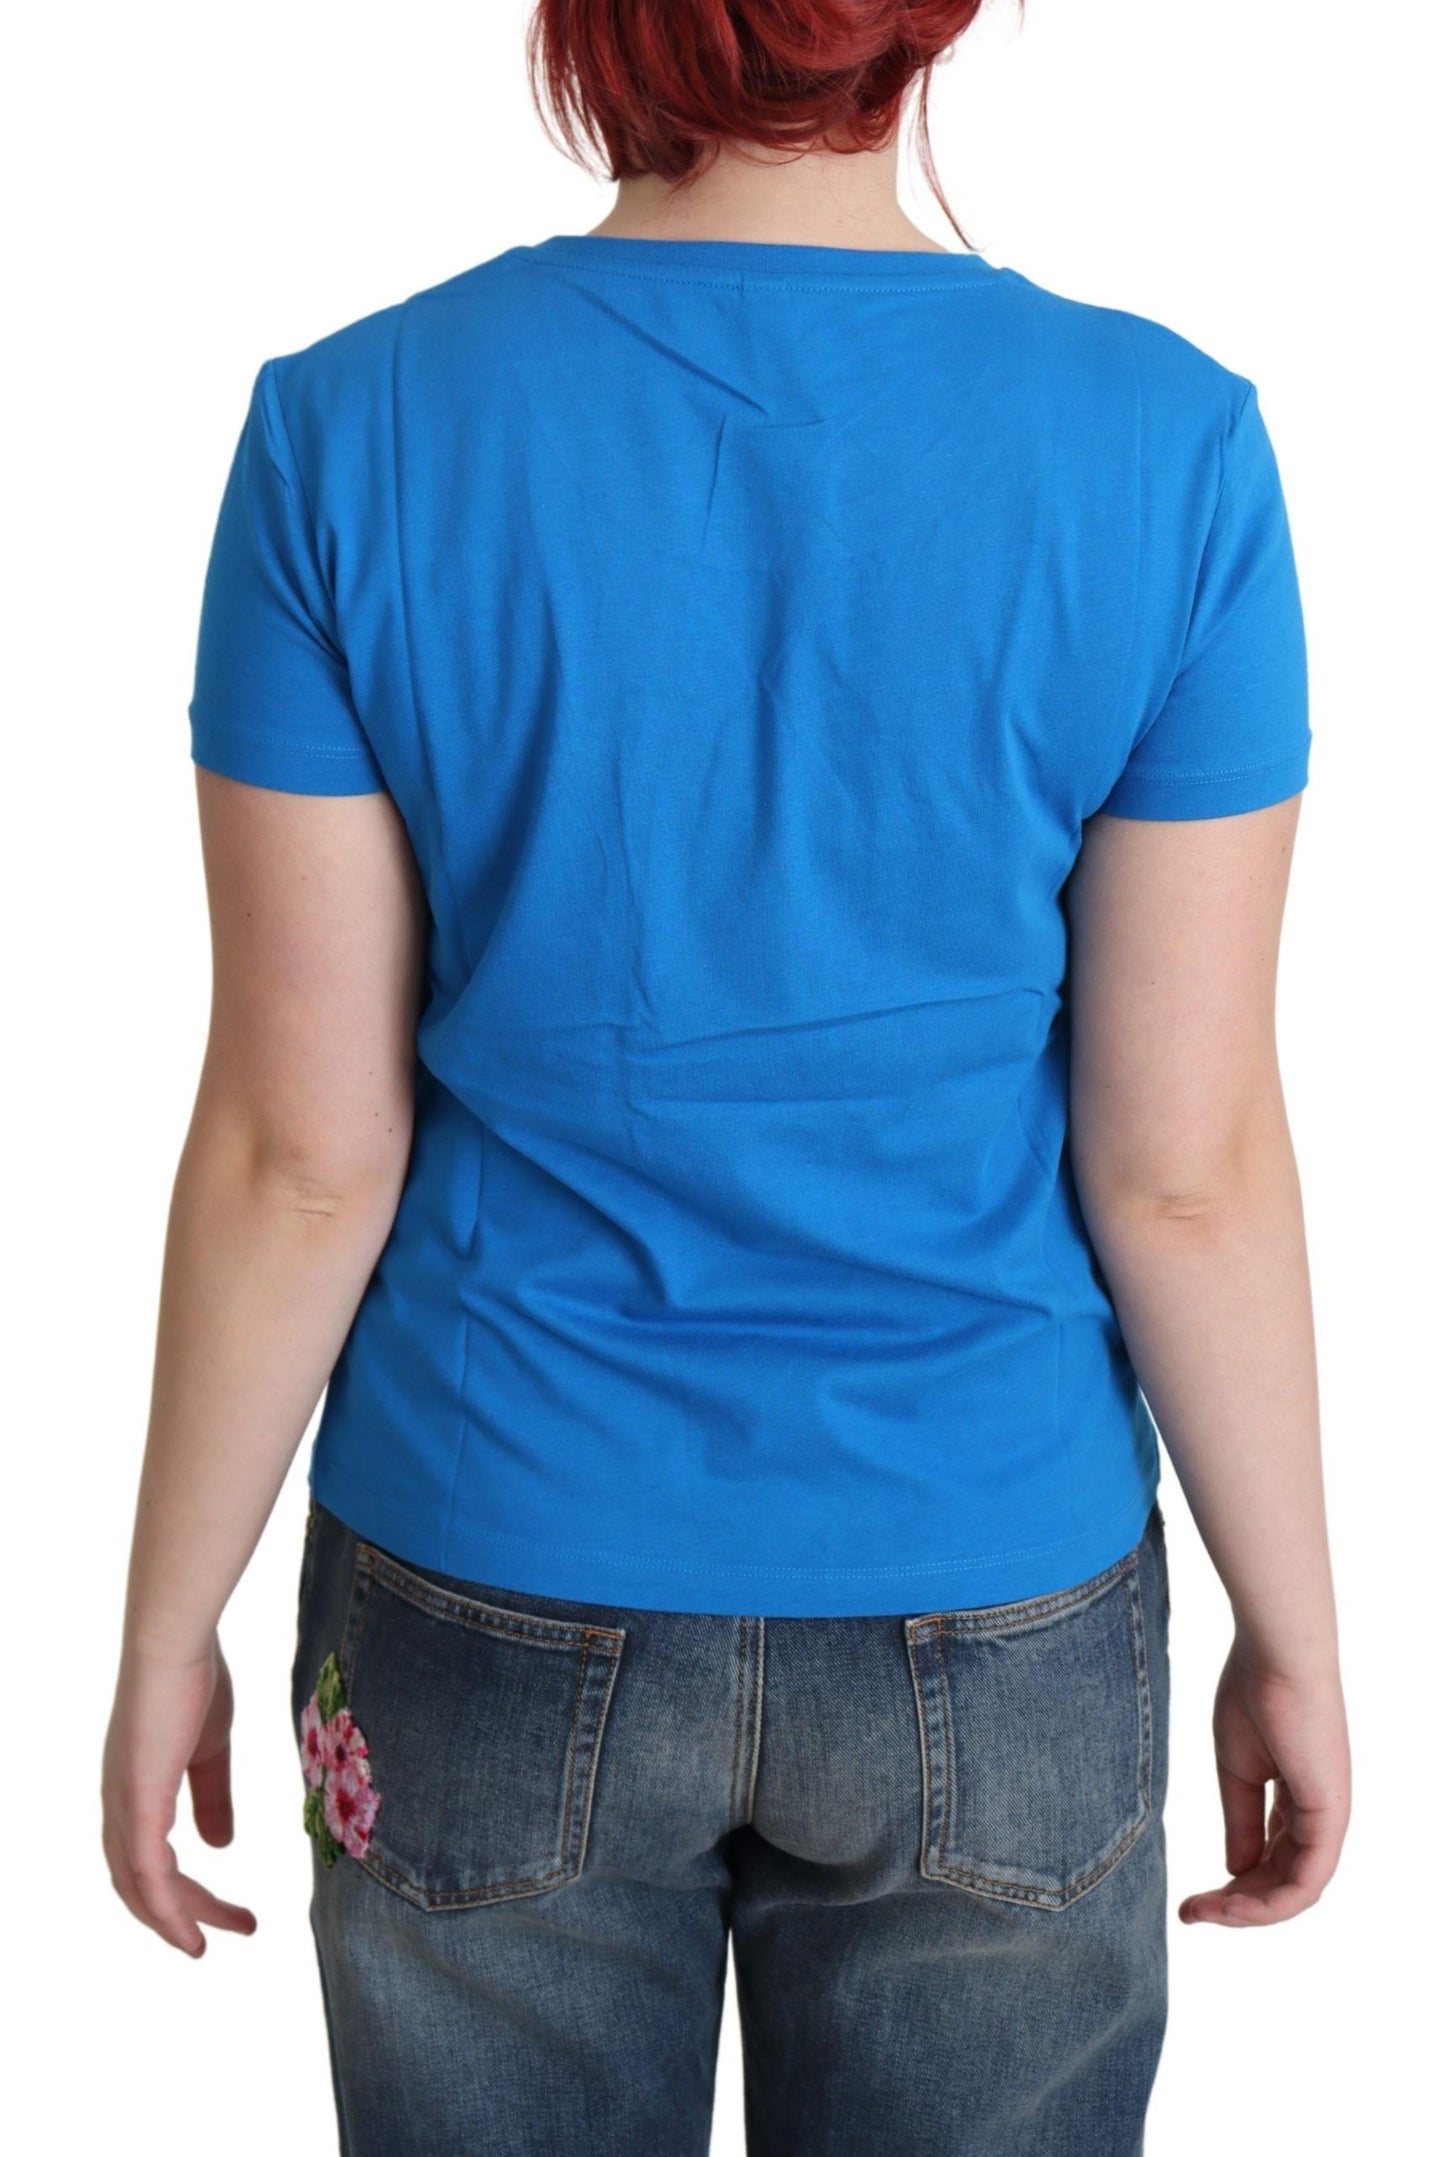 Chic Blue Cotton Tee with Iconic Print